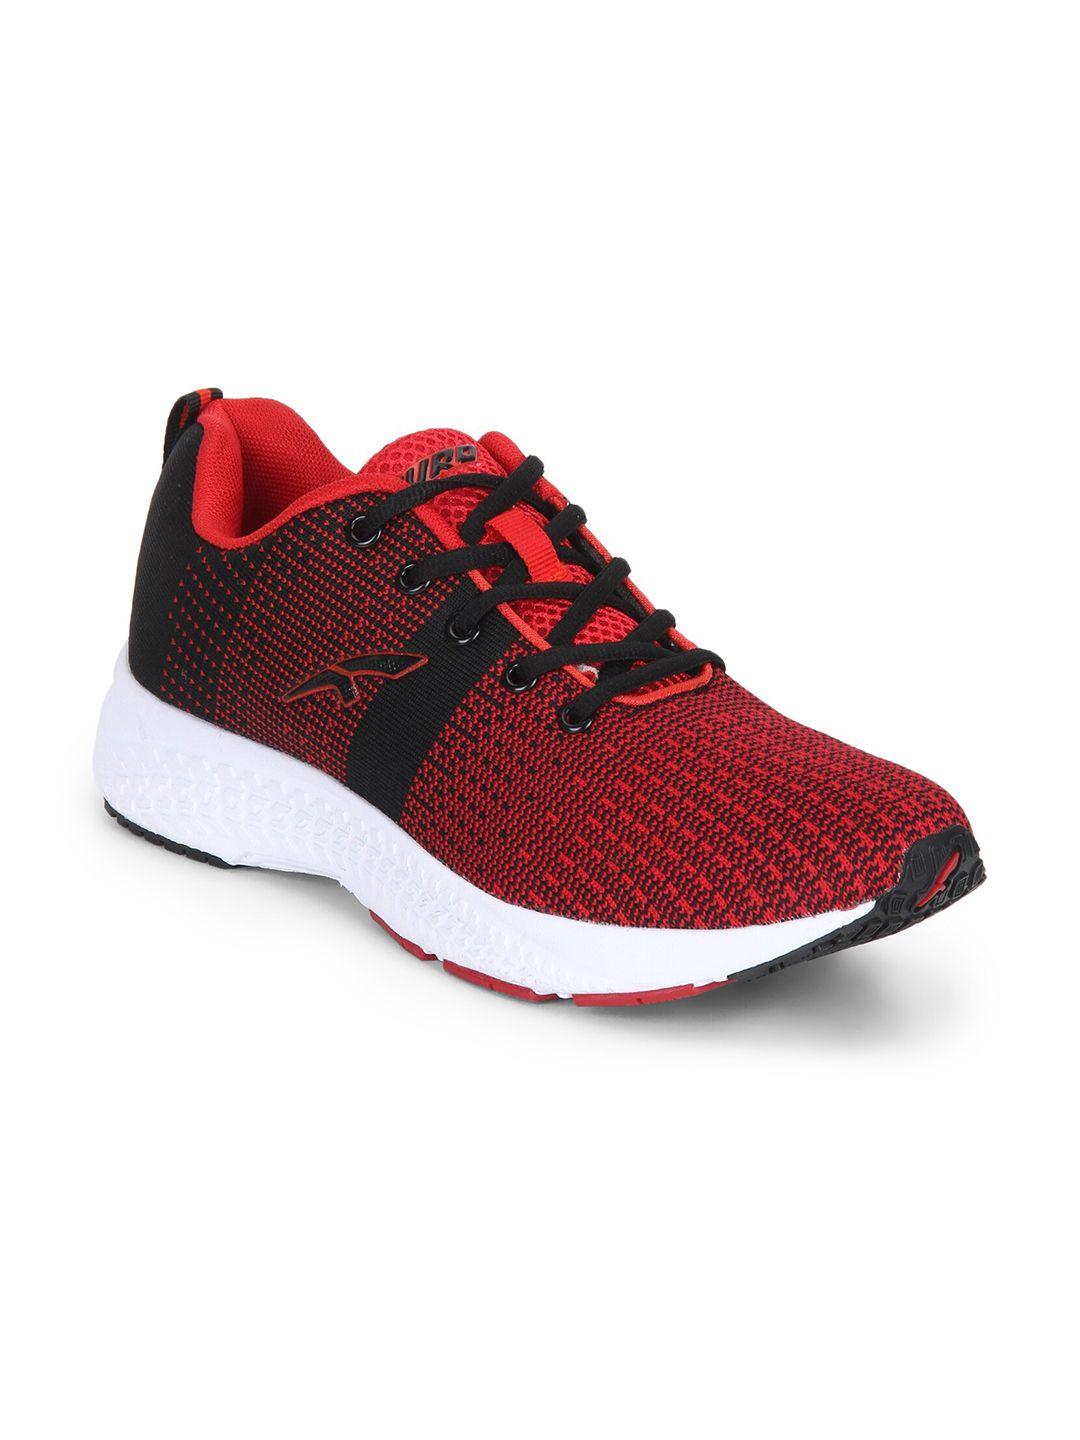 furo by red chief men mesh dri- fit running non-marking shoes